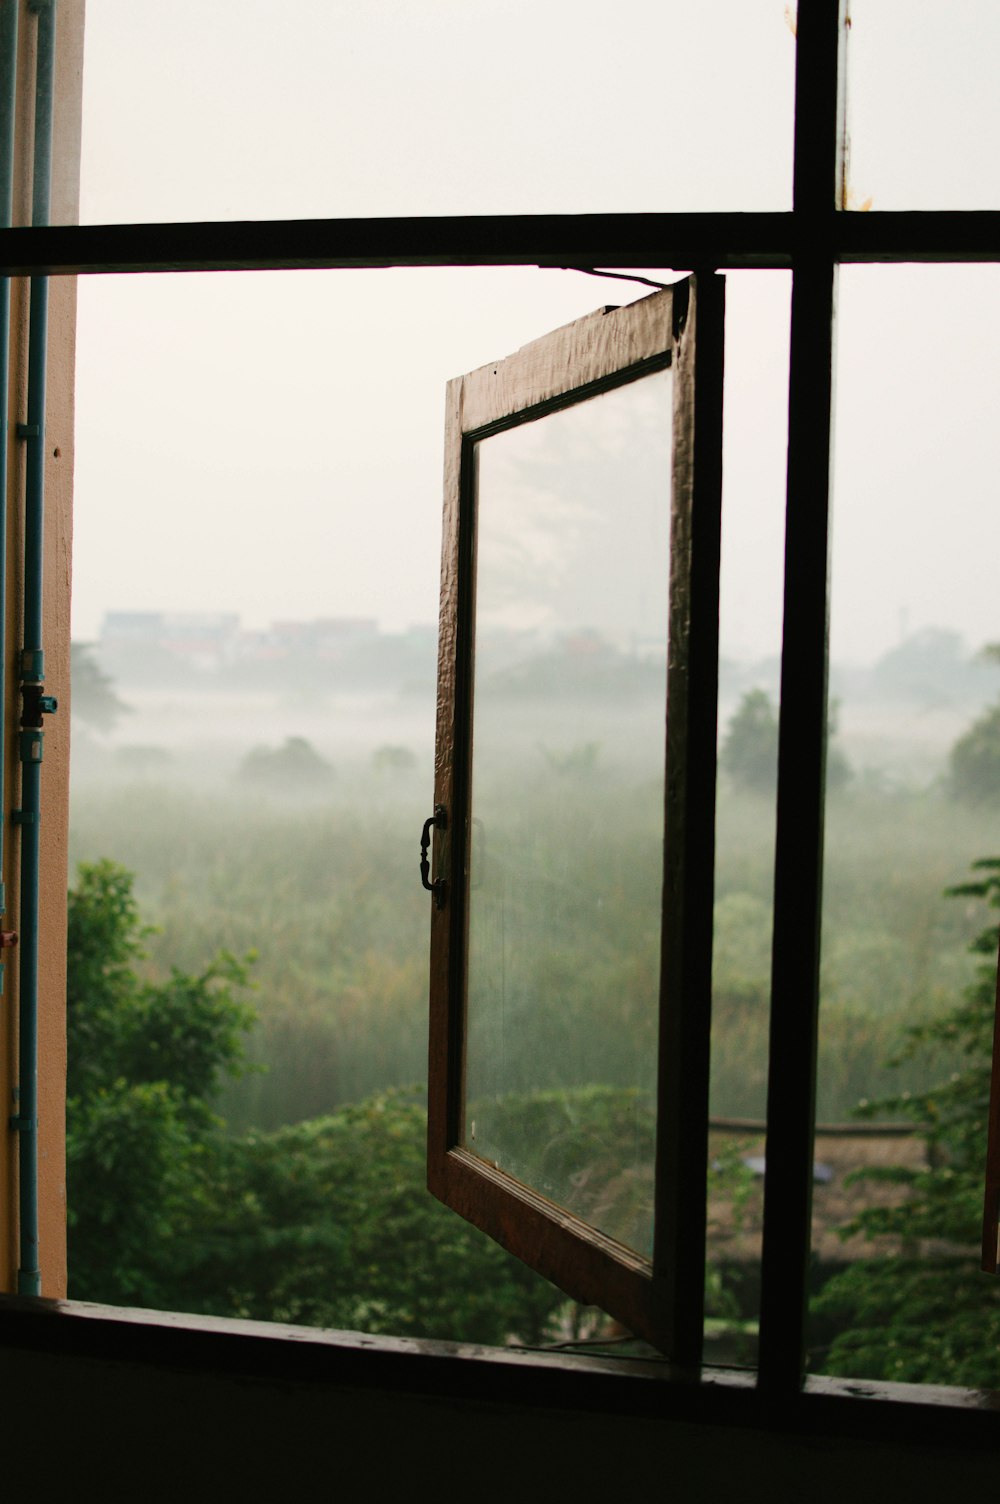 an open window with a view of a foggy field